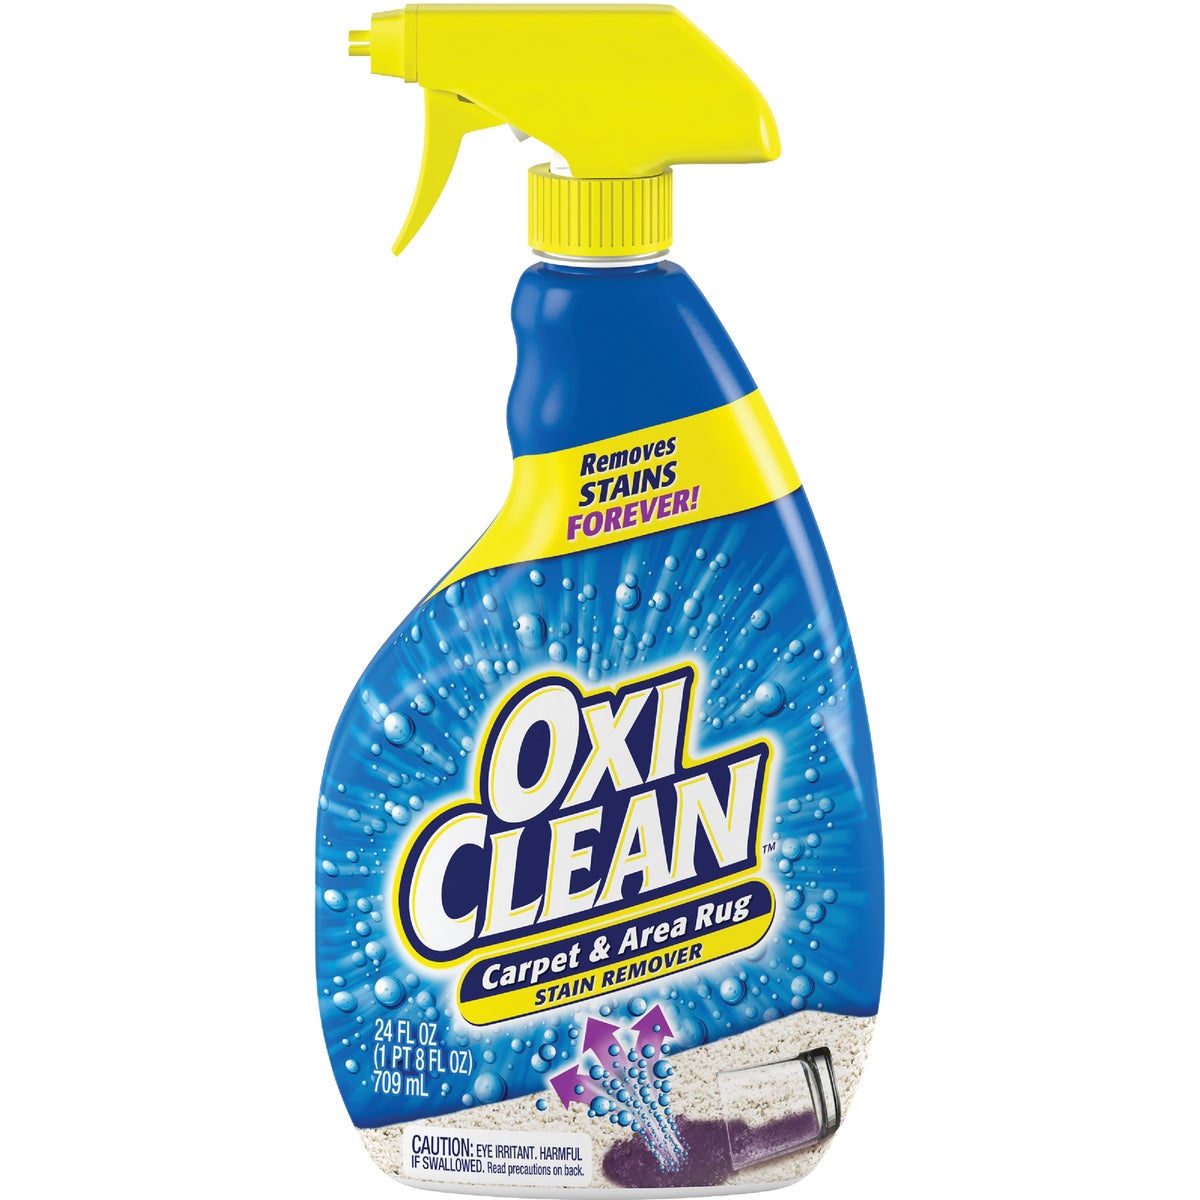 OxiClean 24 Oz. Carpet and Area Rug Stain Remover